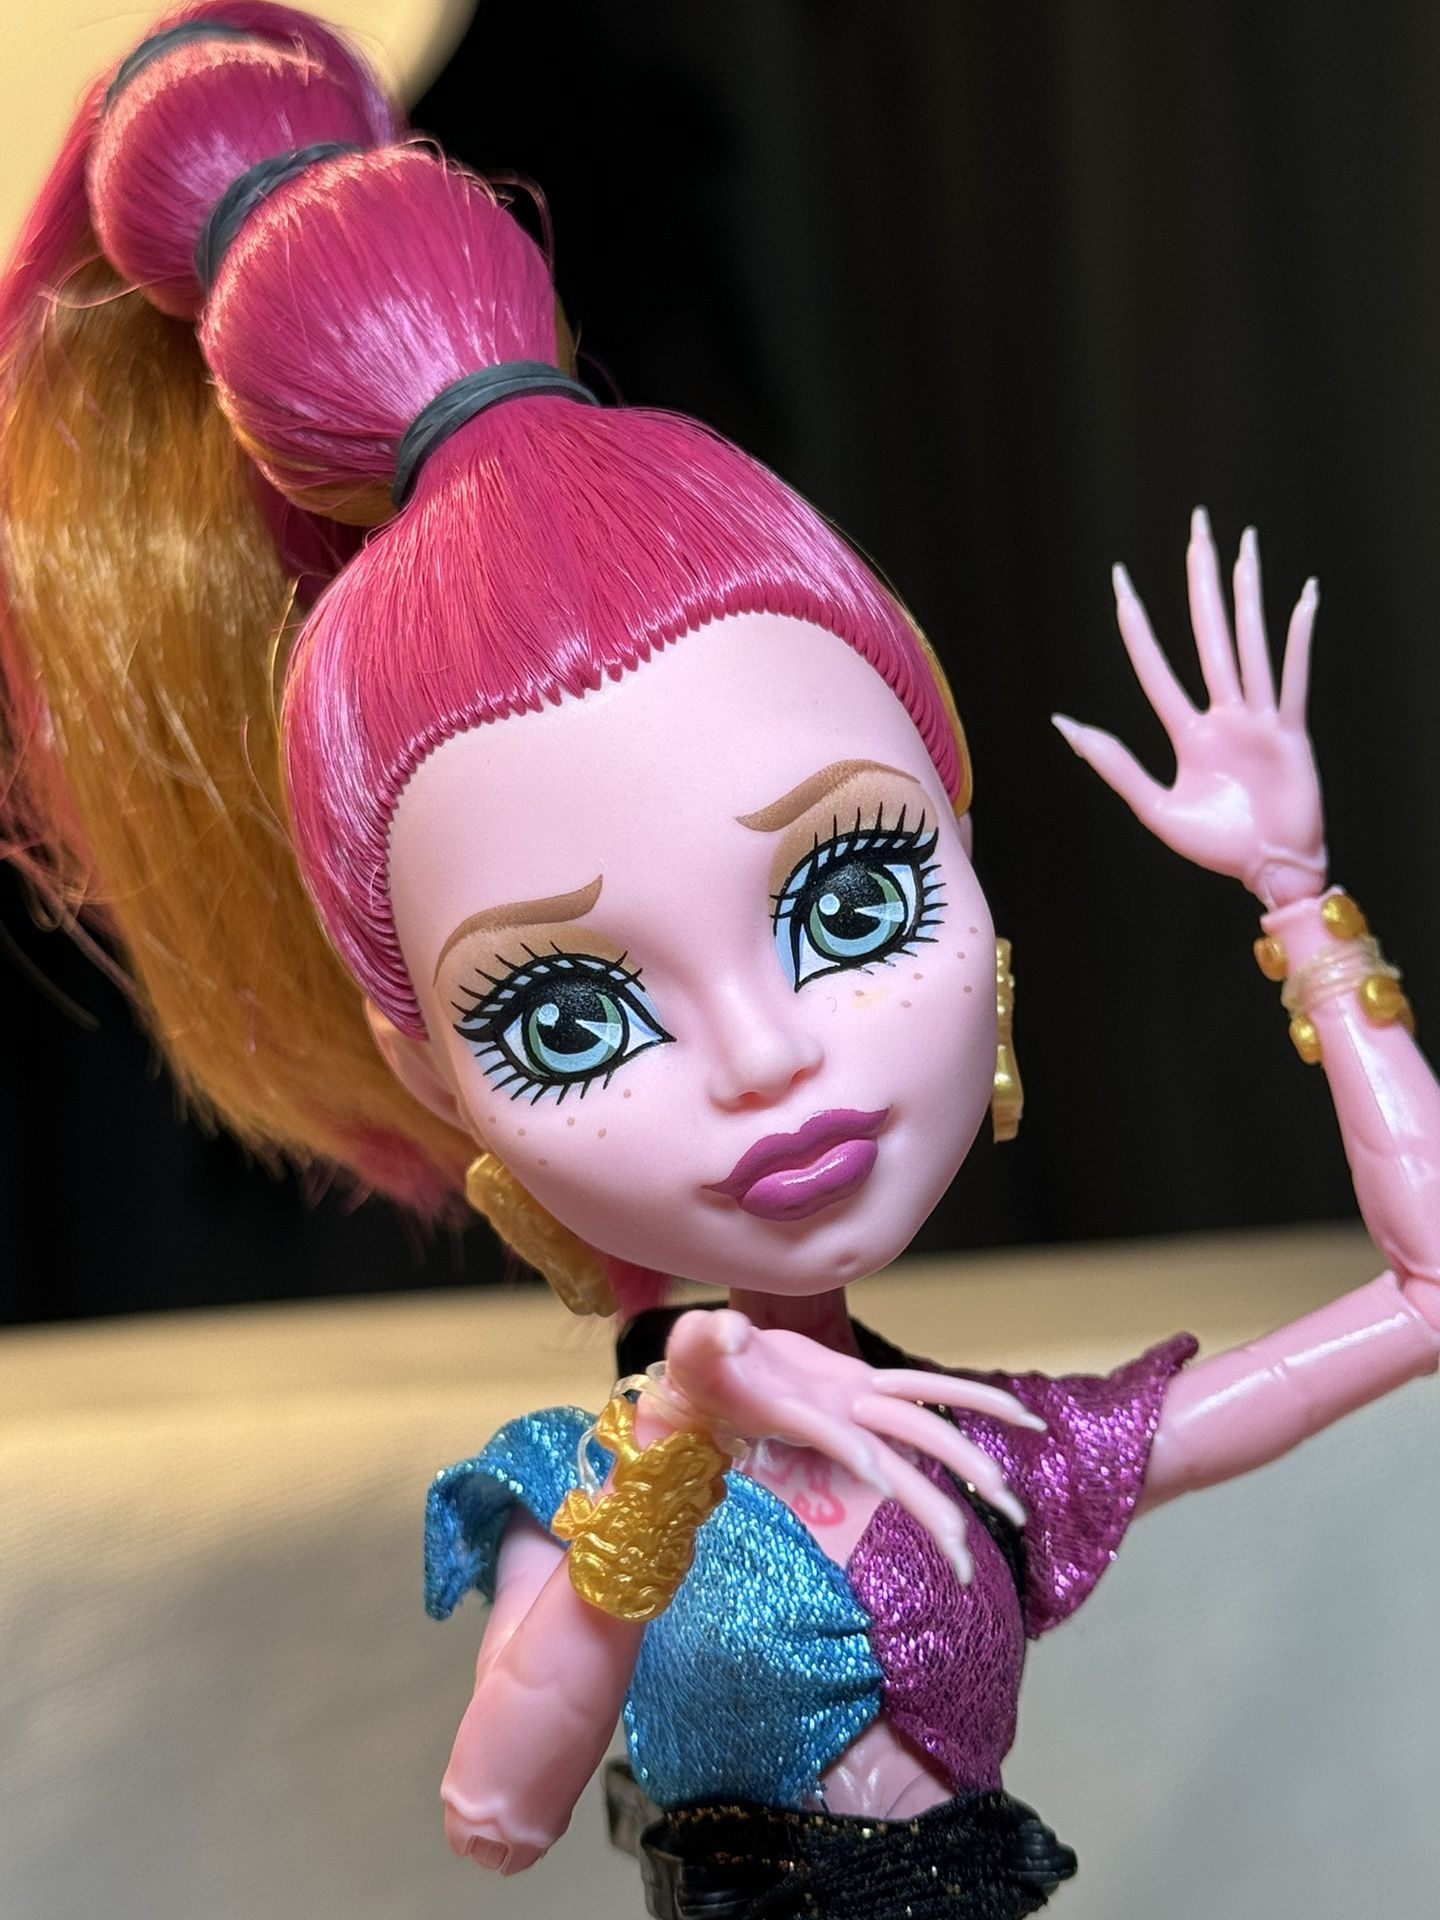 Monster High 13 Wishes GiGi Grant 2013 Doll Good, Clean Condition 